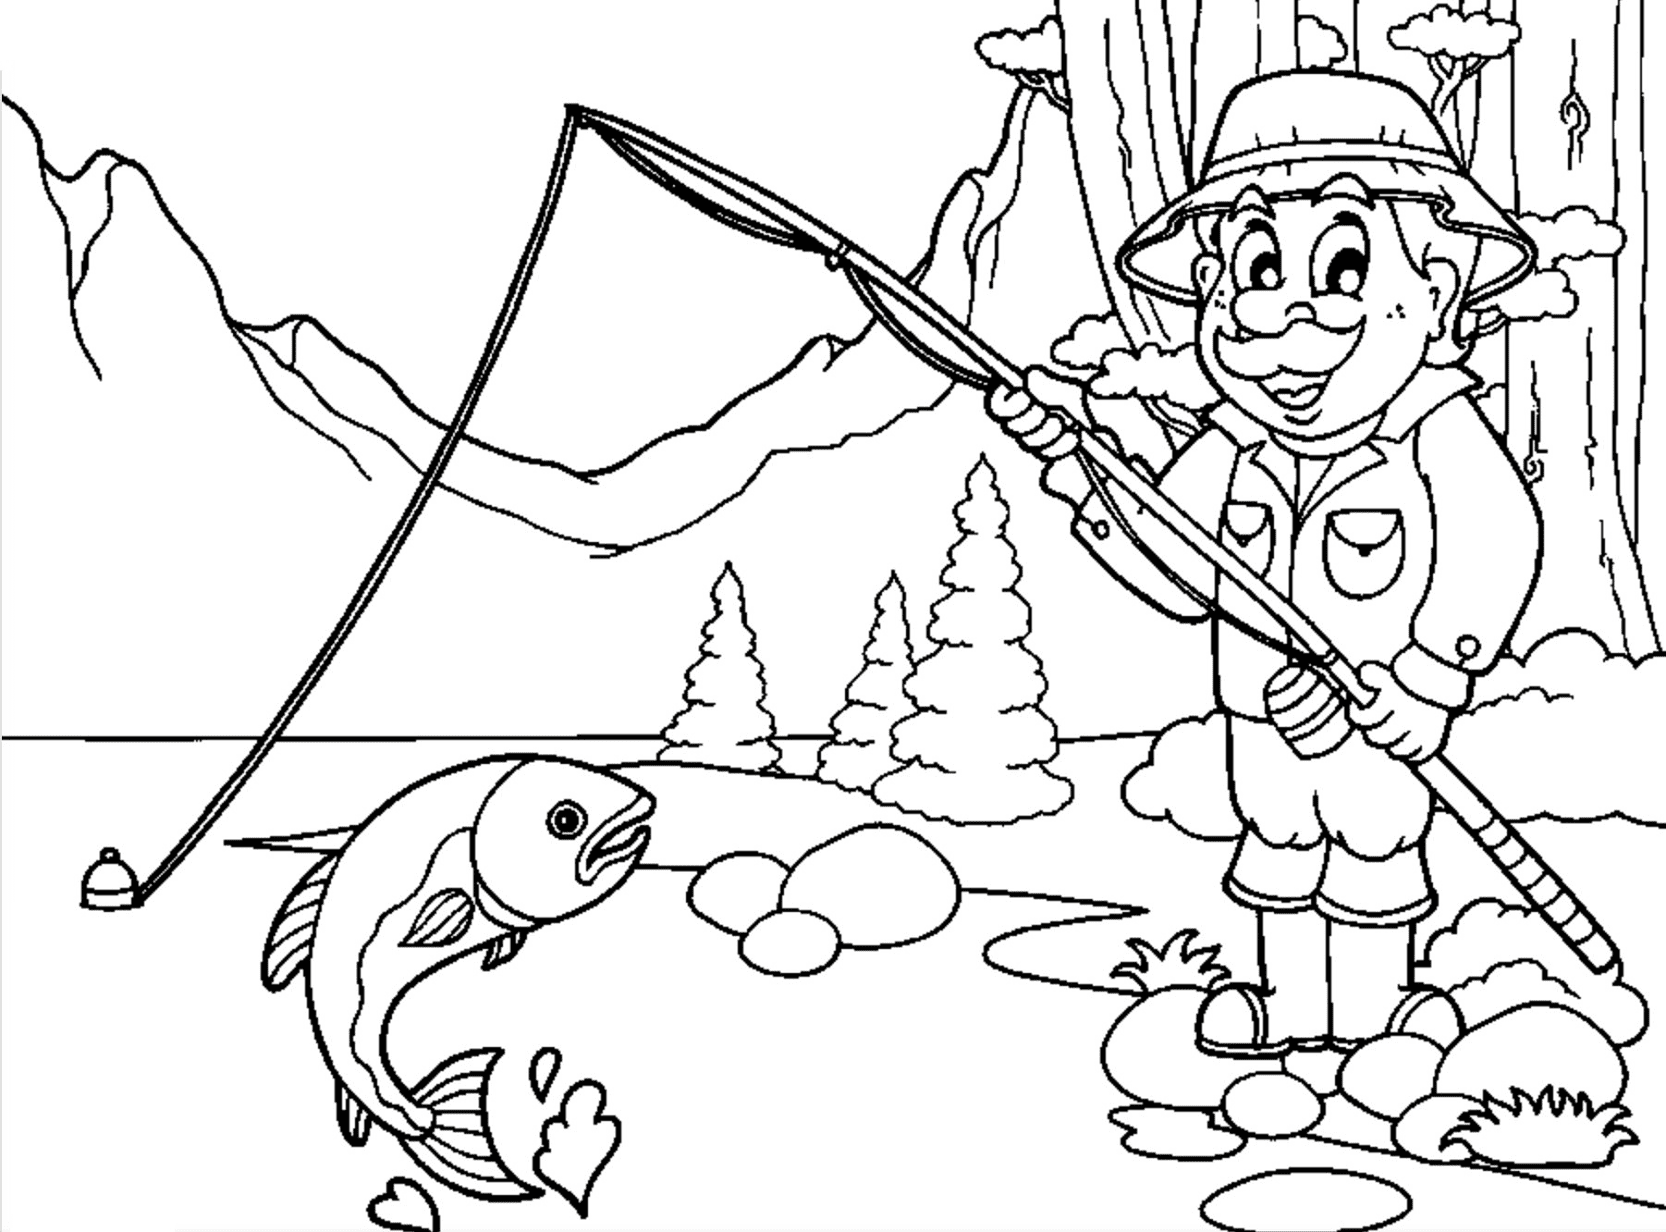 Fisherman on a Lake Landscape Coloring Page